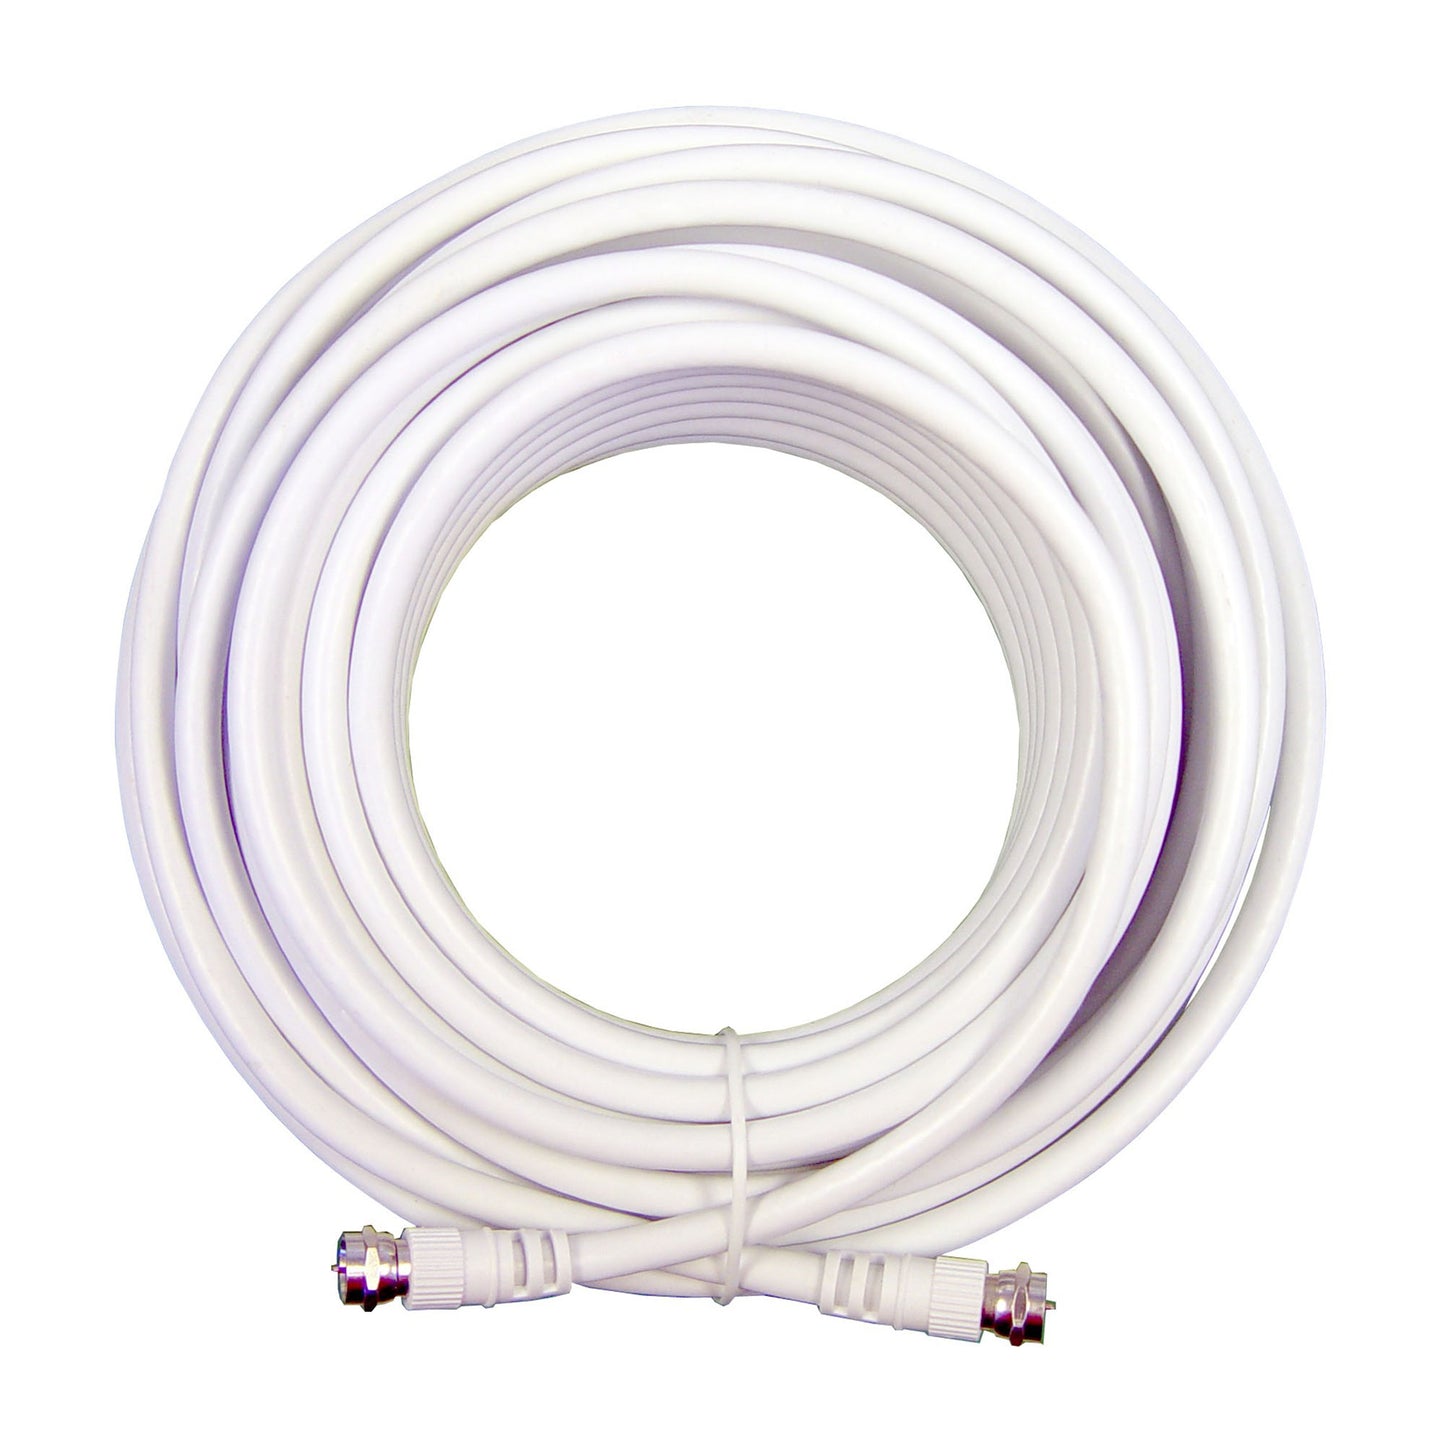 Wilson Cable 50 ft. white RG6 low loss coax cable - 670WI950650